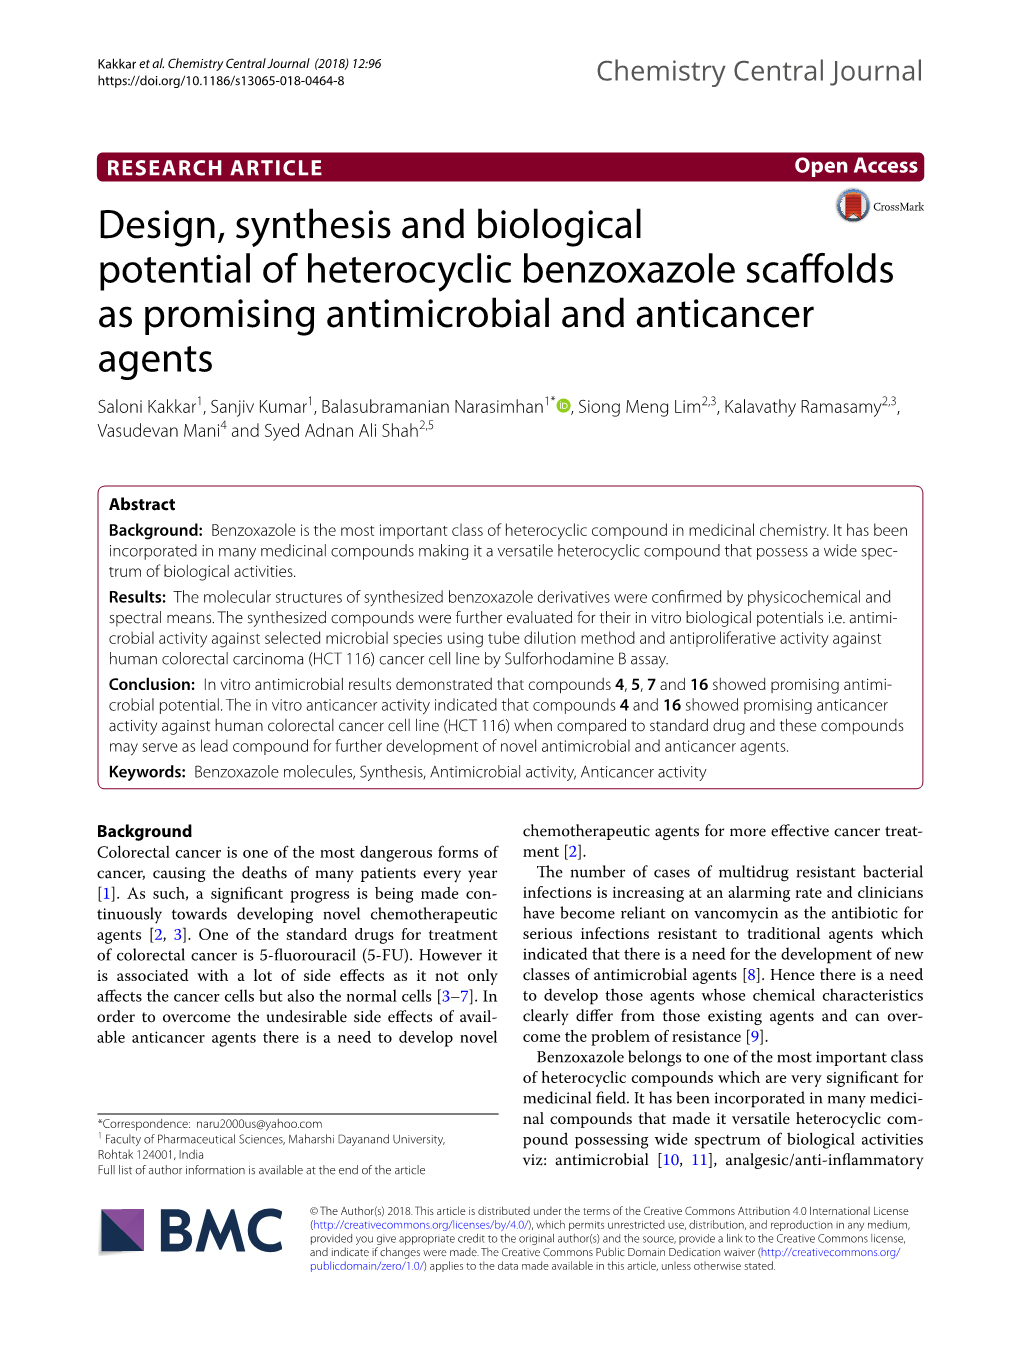 Design, Synthesis and Biological Potential of Heterocyclic Benzoxazole Scaffolds As Promising Antimicrobial and Anticancer Agent